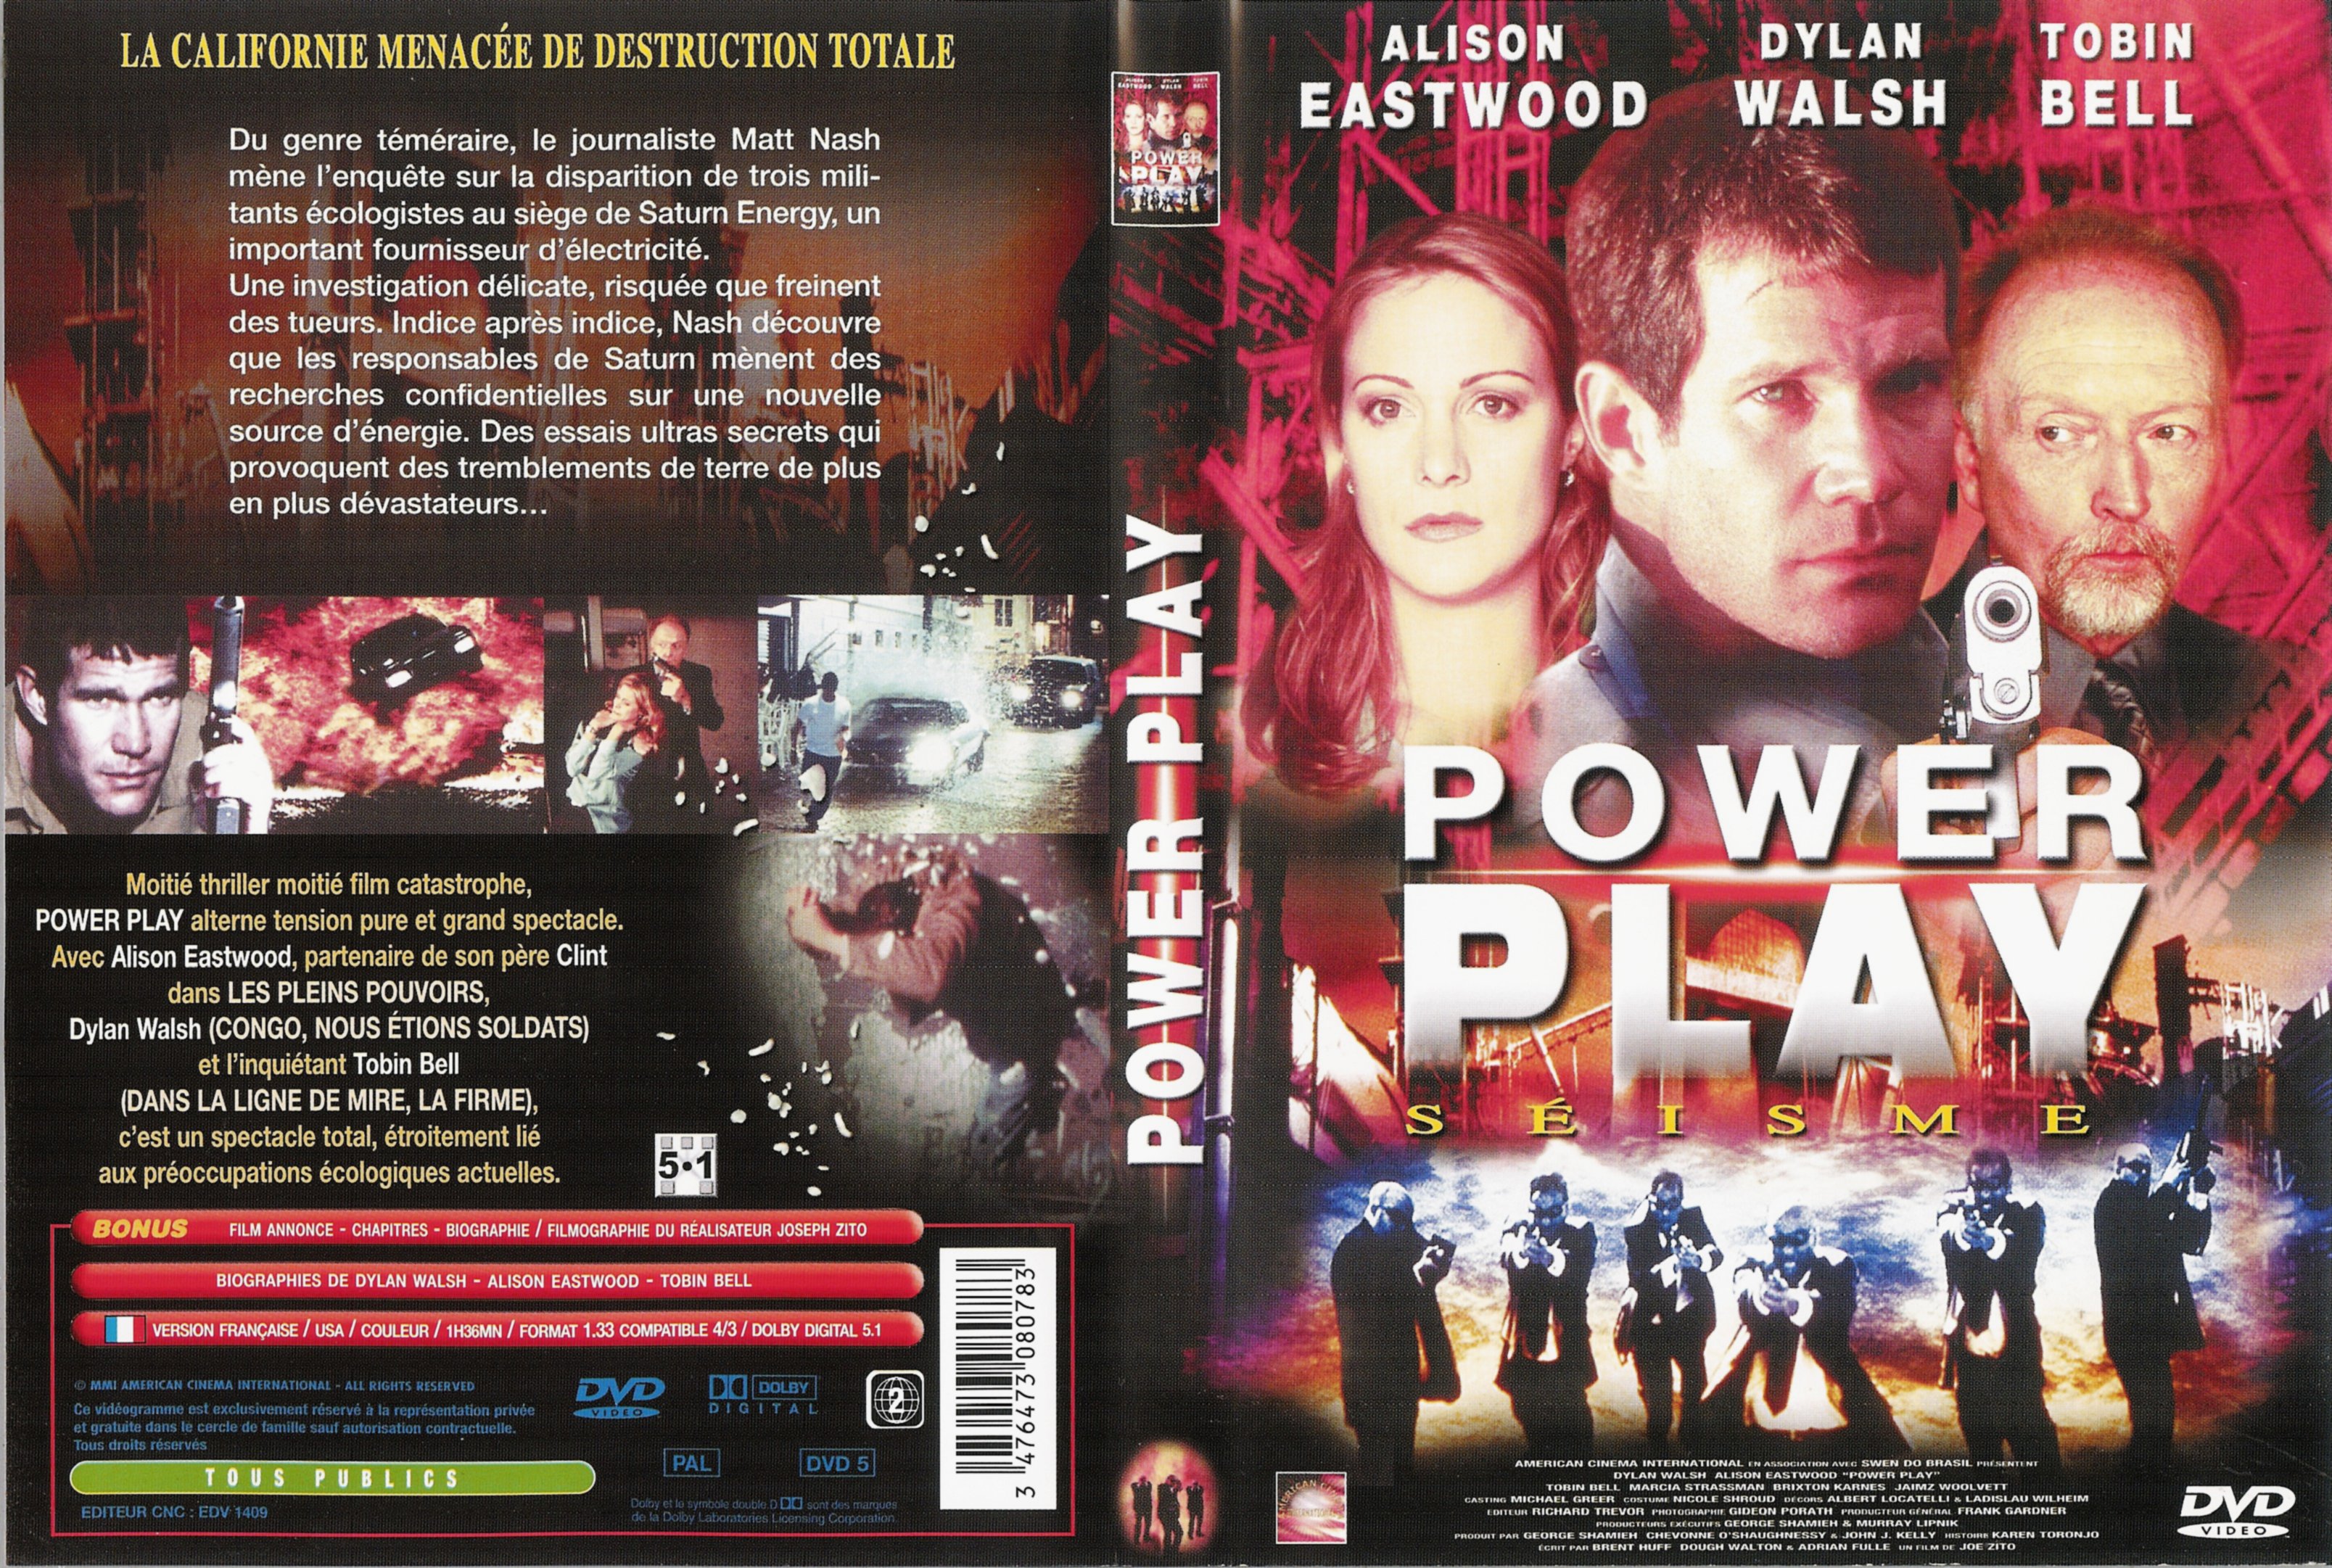 Jaquette DVD Power play seisme